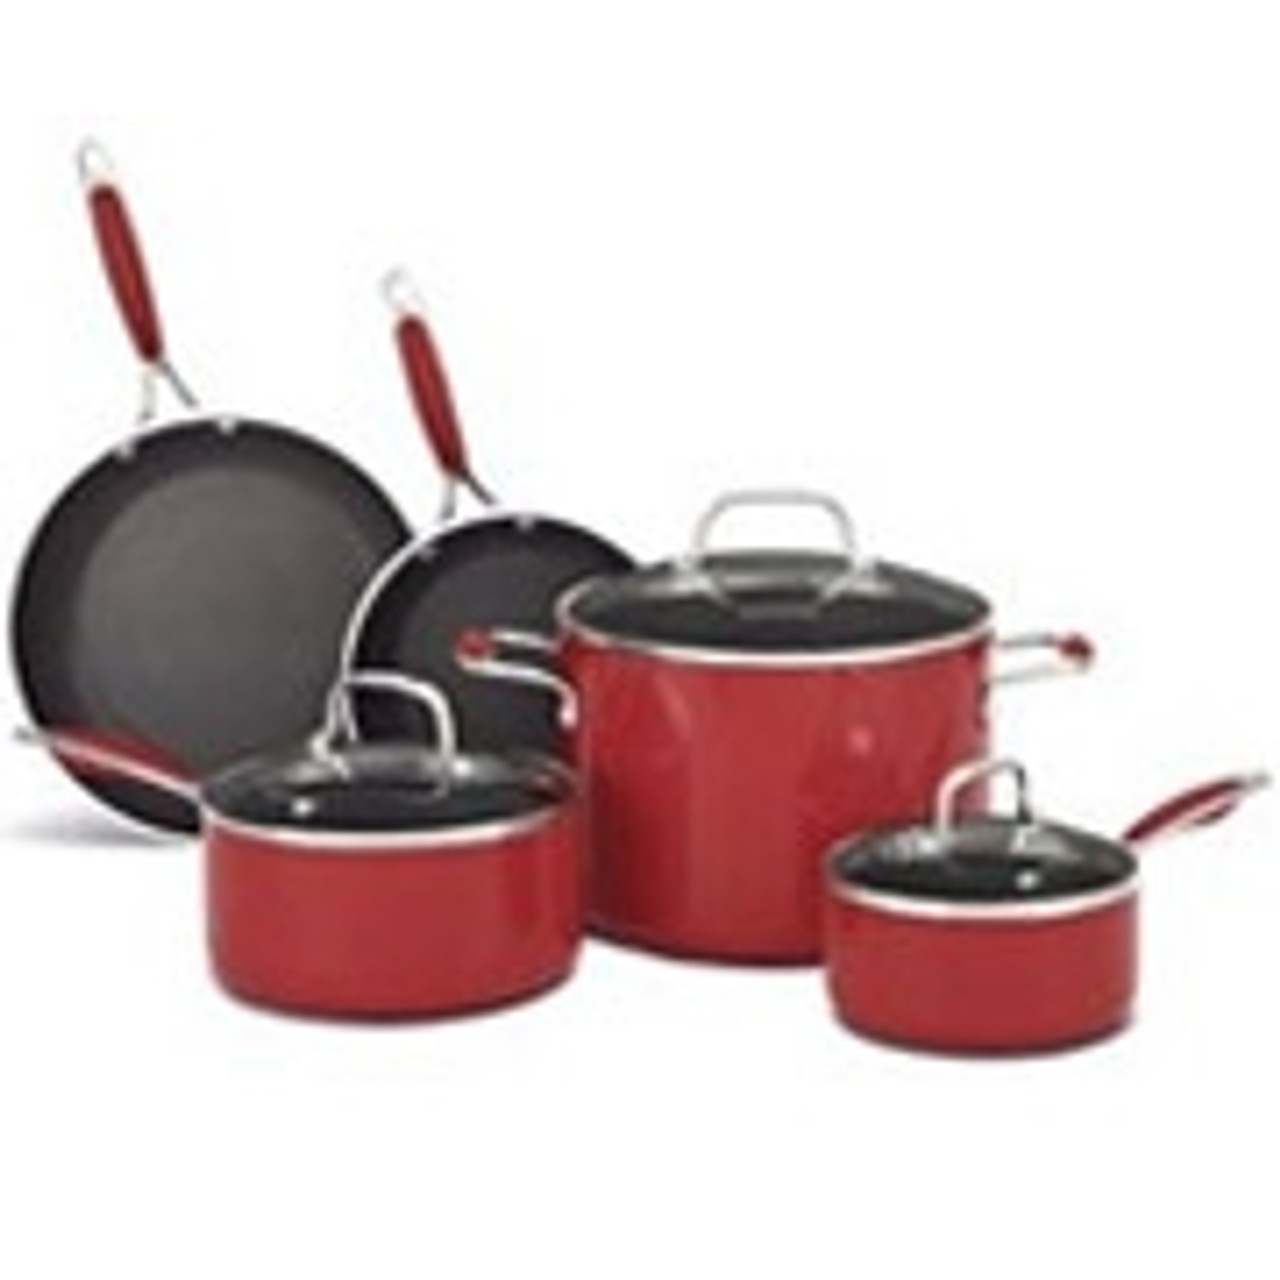 cook pro 7 piece 18 10 stainless steel cookware set